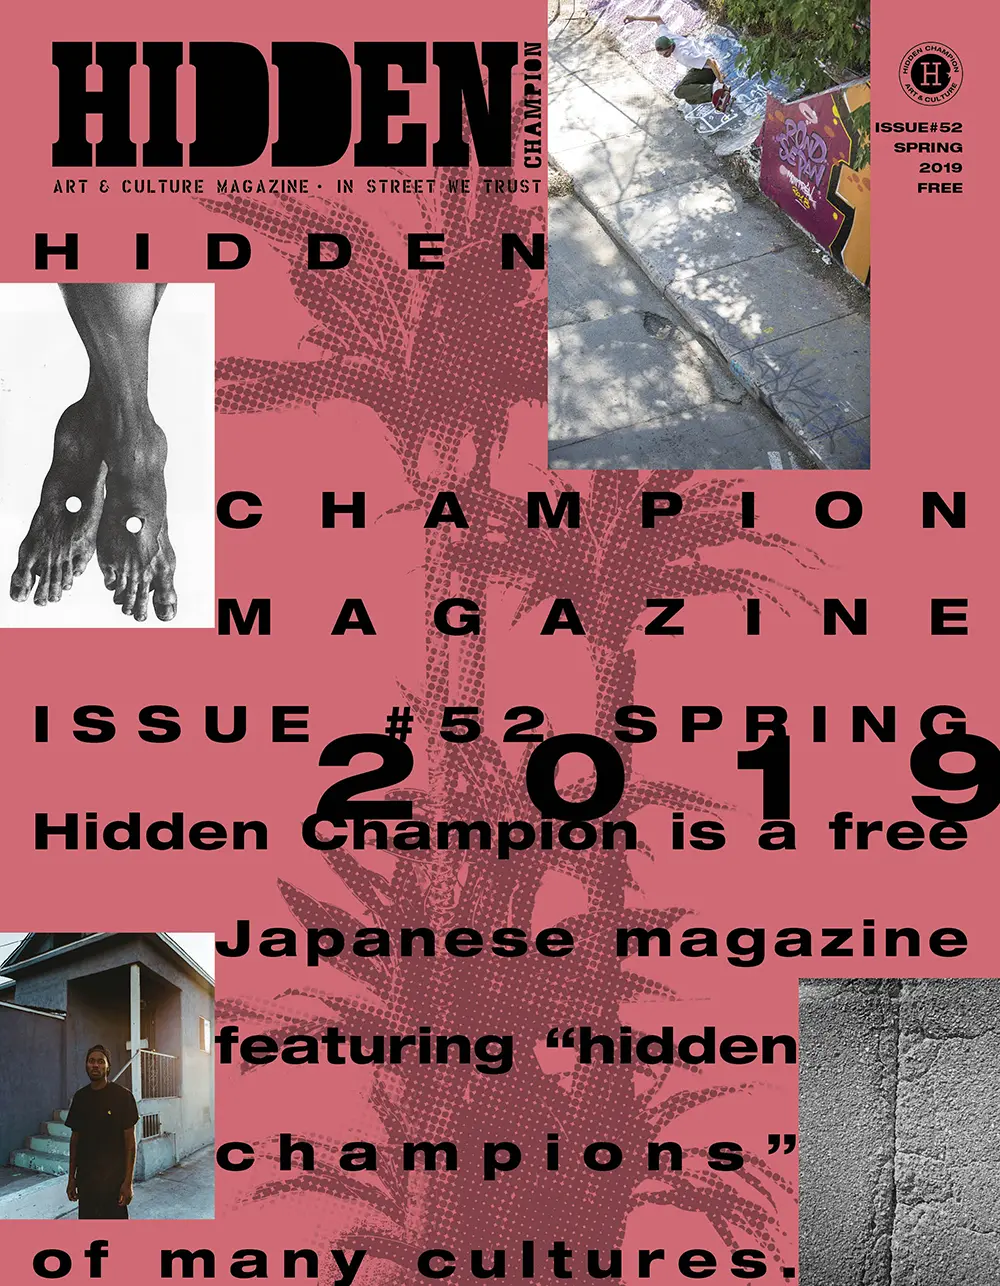 Issue #52